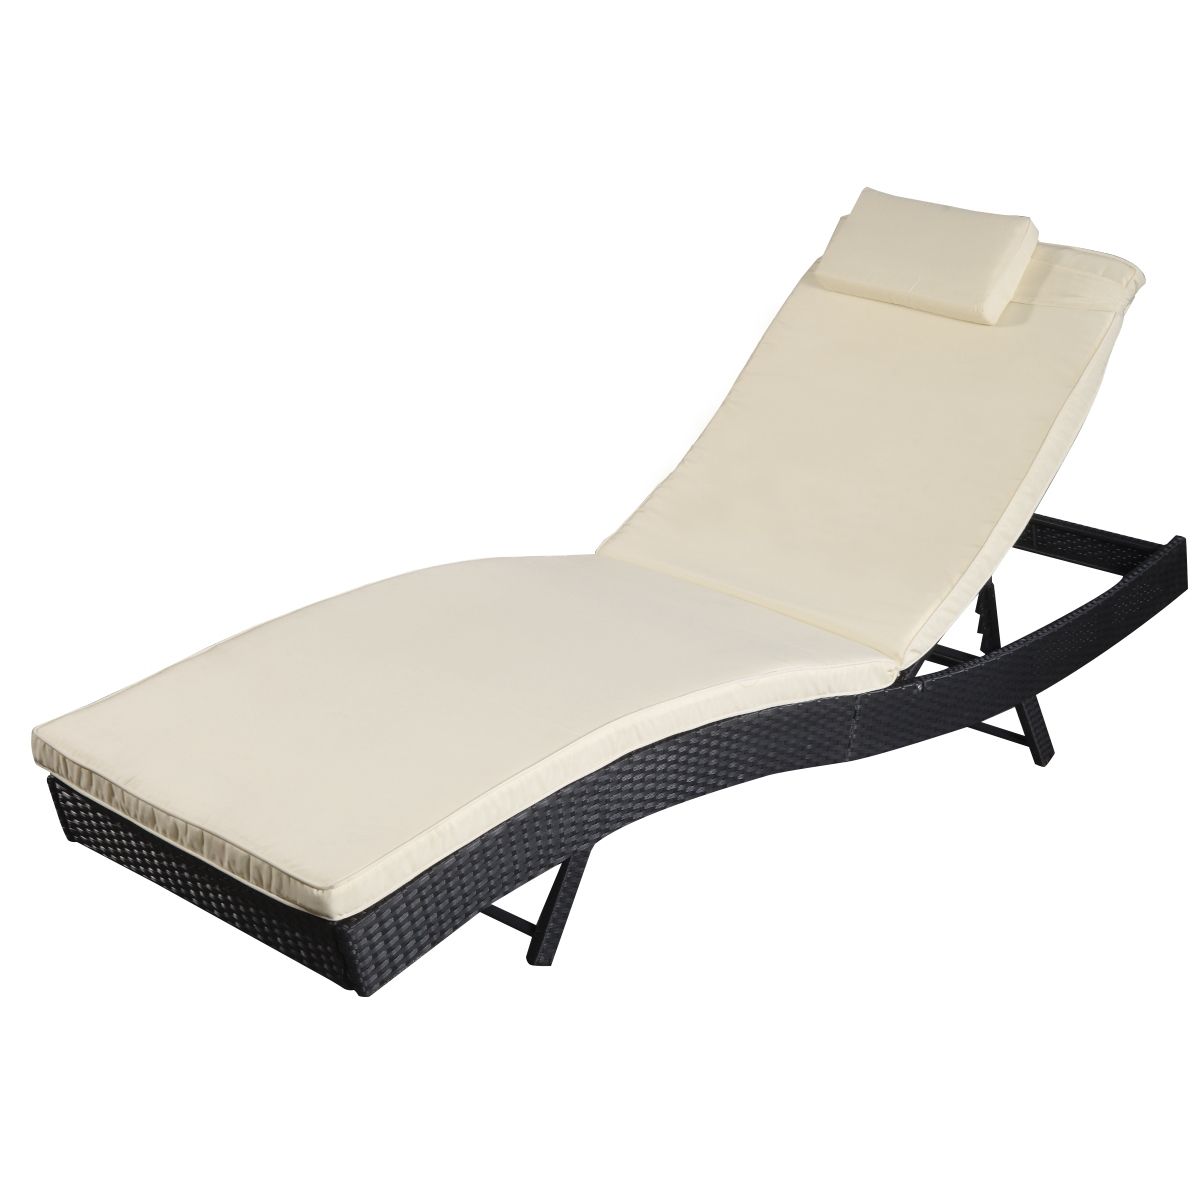 Chaise Lounge Chairs For Outdoors Throughout Well Liked Costway Adjustable Pool Chaise Lounge Chair Outdoor Patio (View 12 of 15)